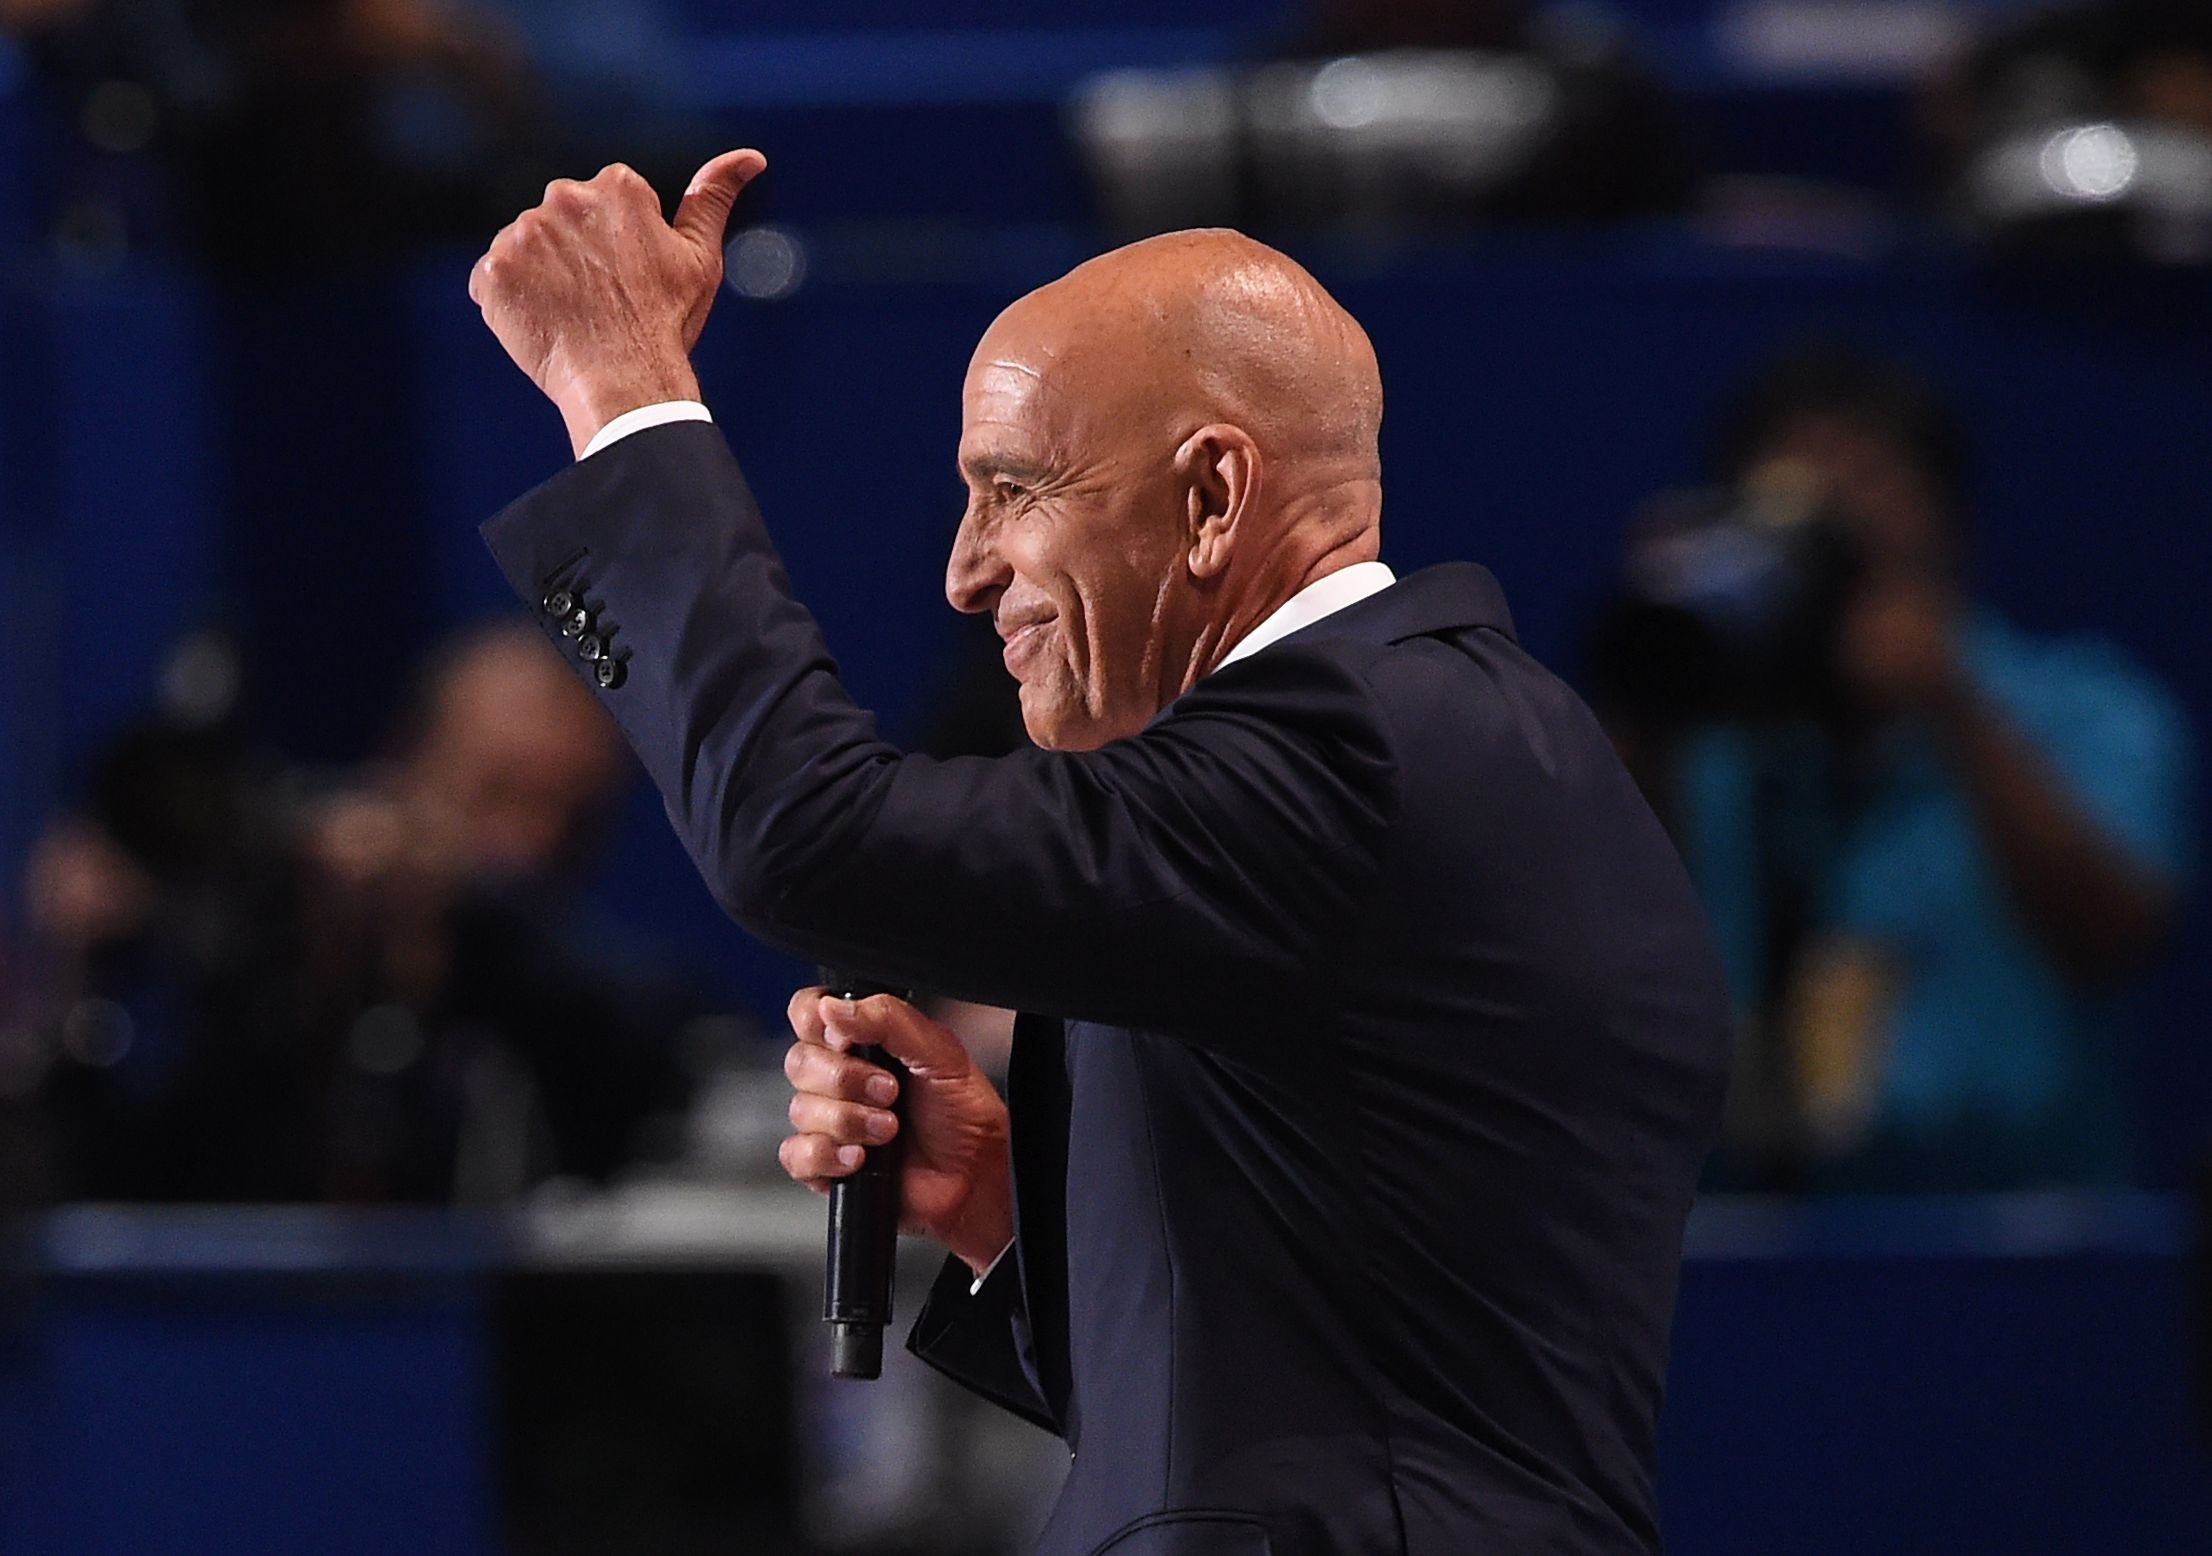 Tom Barrack, CEO of Colony Capital, addresses the final night of the Republican National Convention at Quicken Loans Arena in Cleveland, Ohio on Thursday, July 21, 2016.